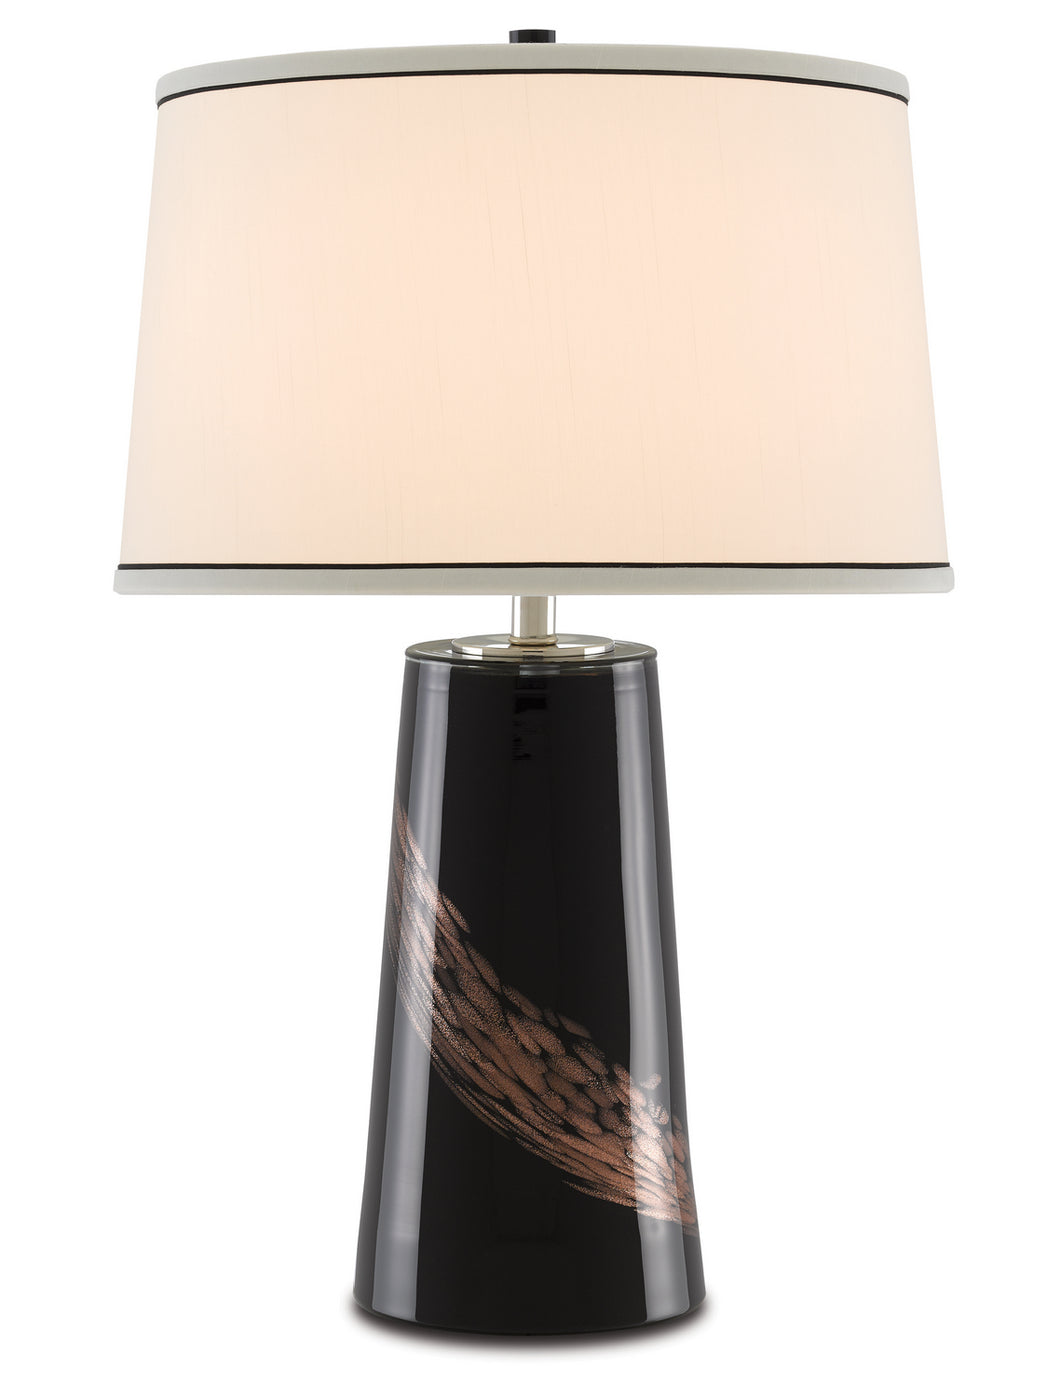 Currey and Company - 6000-0649 - One Light Table Lamp - Artois